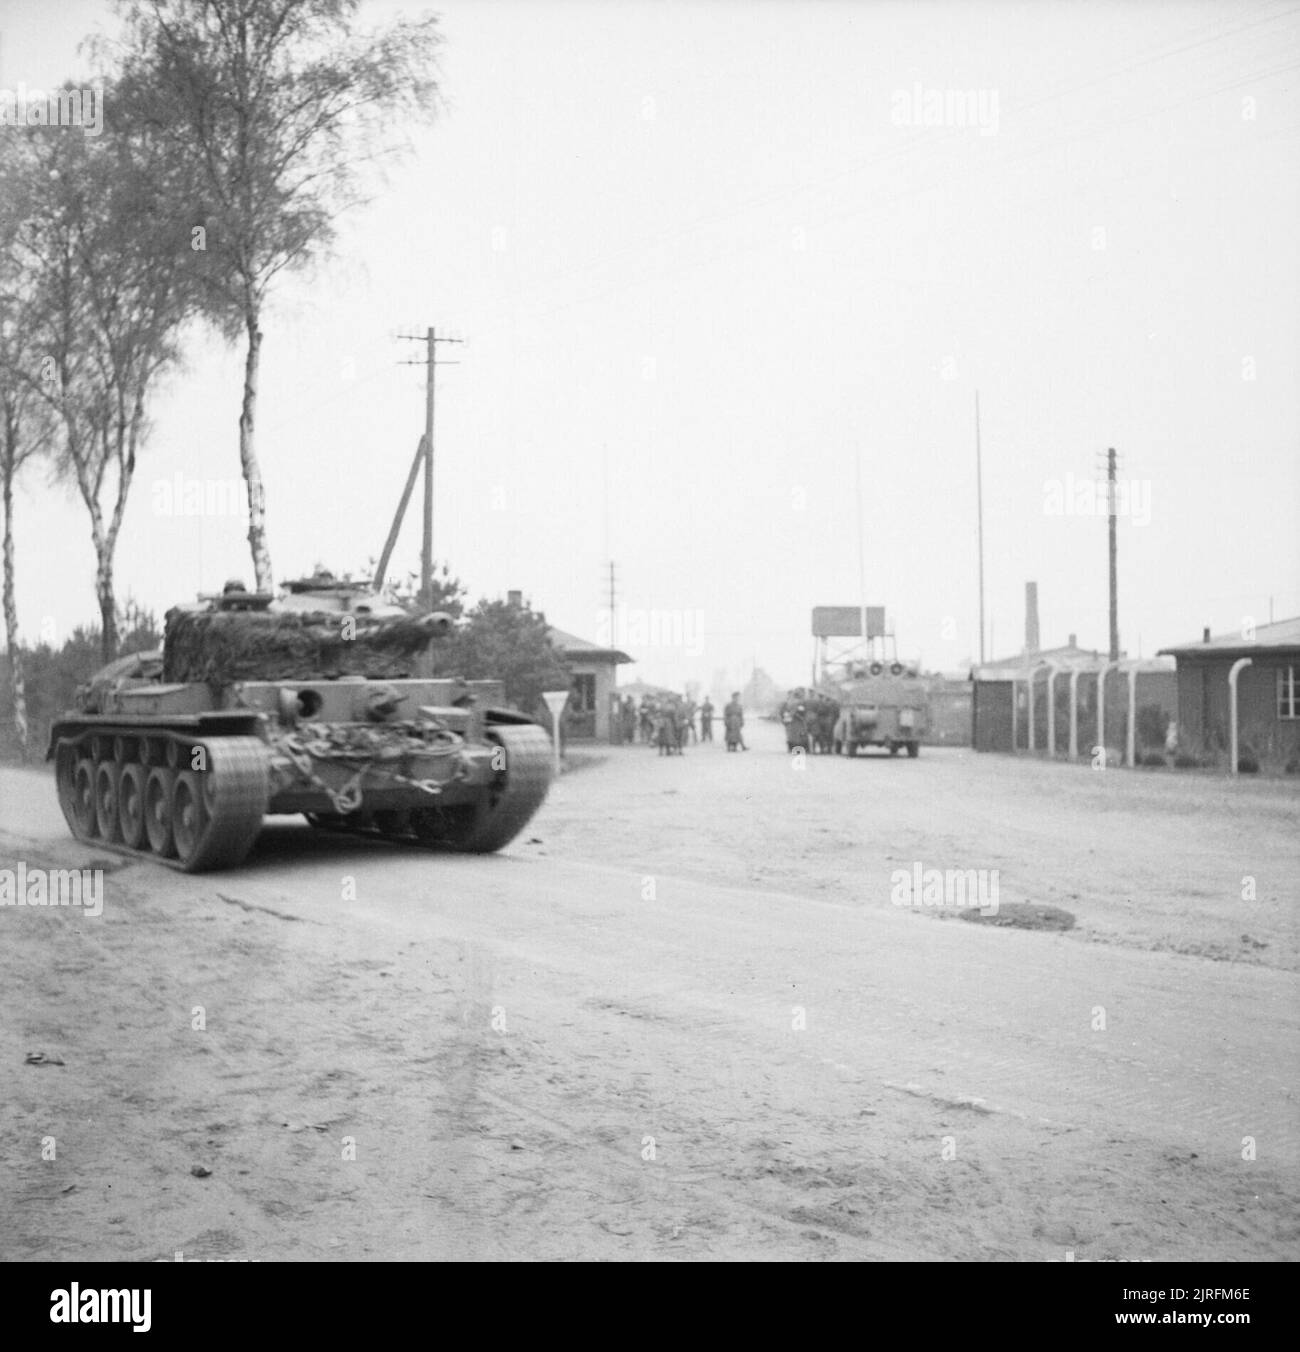 A Comet tank of 11th Armoured Division passes the camp gate at Bergen Belsen concentration camp, 15 April 1945. The British Army arrives at Belsen concentration camp. A Comet tank of 11th Armoured Division passes the camp gate. Stock Photo